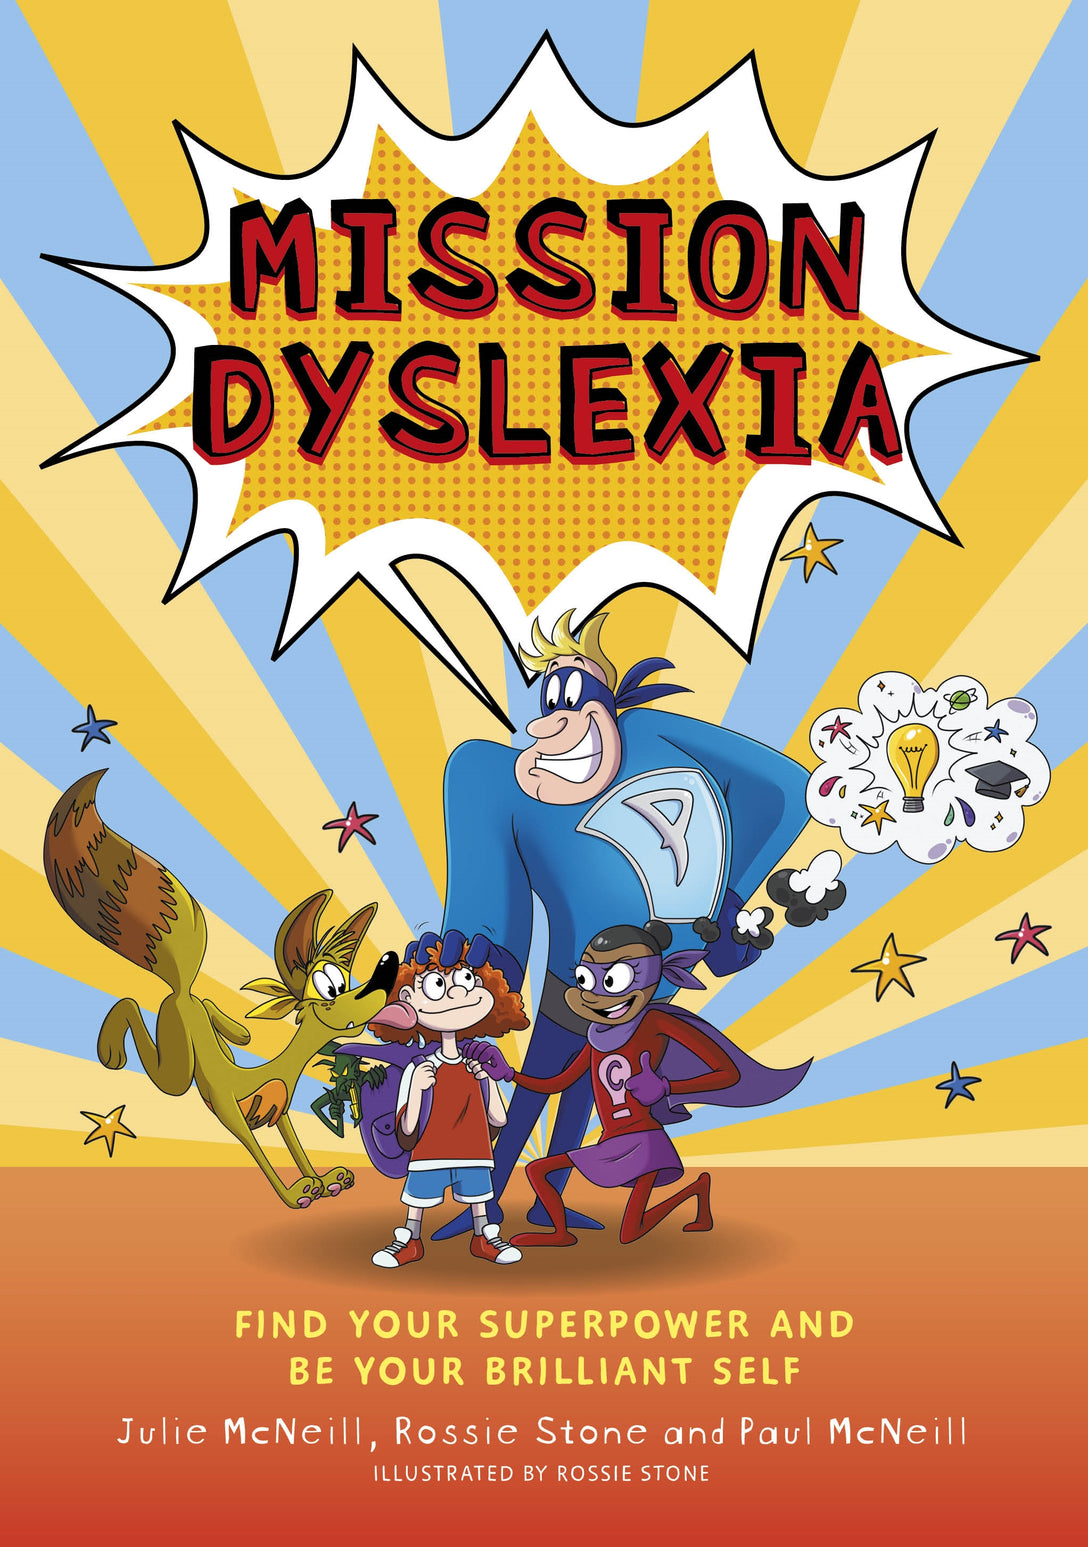 Mission Dyslexia by Rossie Stone, Julie McNeill, Paul McNeill, Rossie Stone